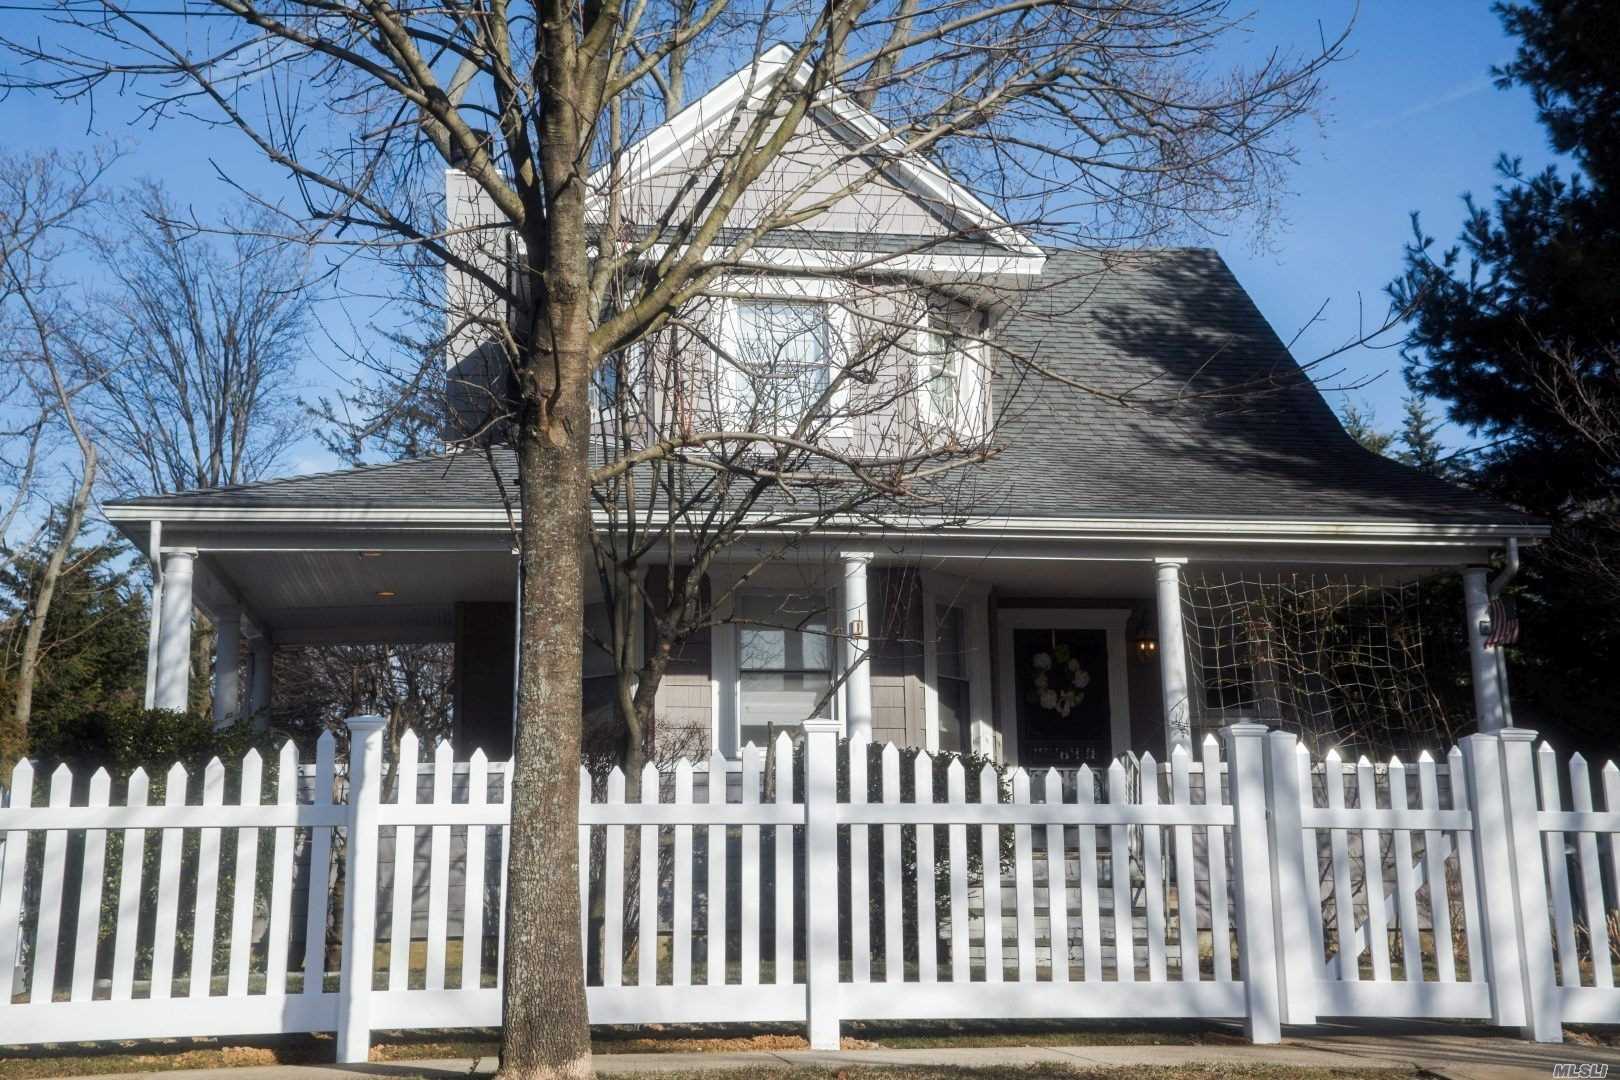 Beautiful 3 Bd, 2 Ba Victorian With Wrap-Around Frnt Porch. Chef&rsquo;s Kitchen W/ Dbl Ovens & Island. Lots Of Counter Space. Many Upgrades, Fireplace, Lrg Landscaped Backyard W/ Lighting, Veg Garden, New Fencing, In-Ground Sprinklers, And Ldry Rm On 1st Floor. Priv Driveway W/ Beautiful 12&rsquo; Priv Hedge And 1-1/2 Car Garage. Welcoming Frnt Entrance Foyer And Stairway. Part Of Inc. Vill Of Freeport Electric, Natural Gas And Water. Move-In Ready! 40 Min Lirr To Nyc. Mins To Jones Beach & Nautical Mile.